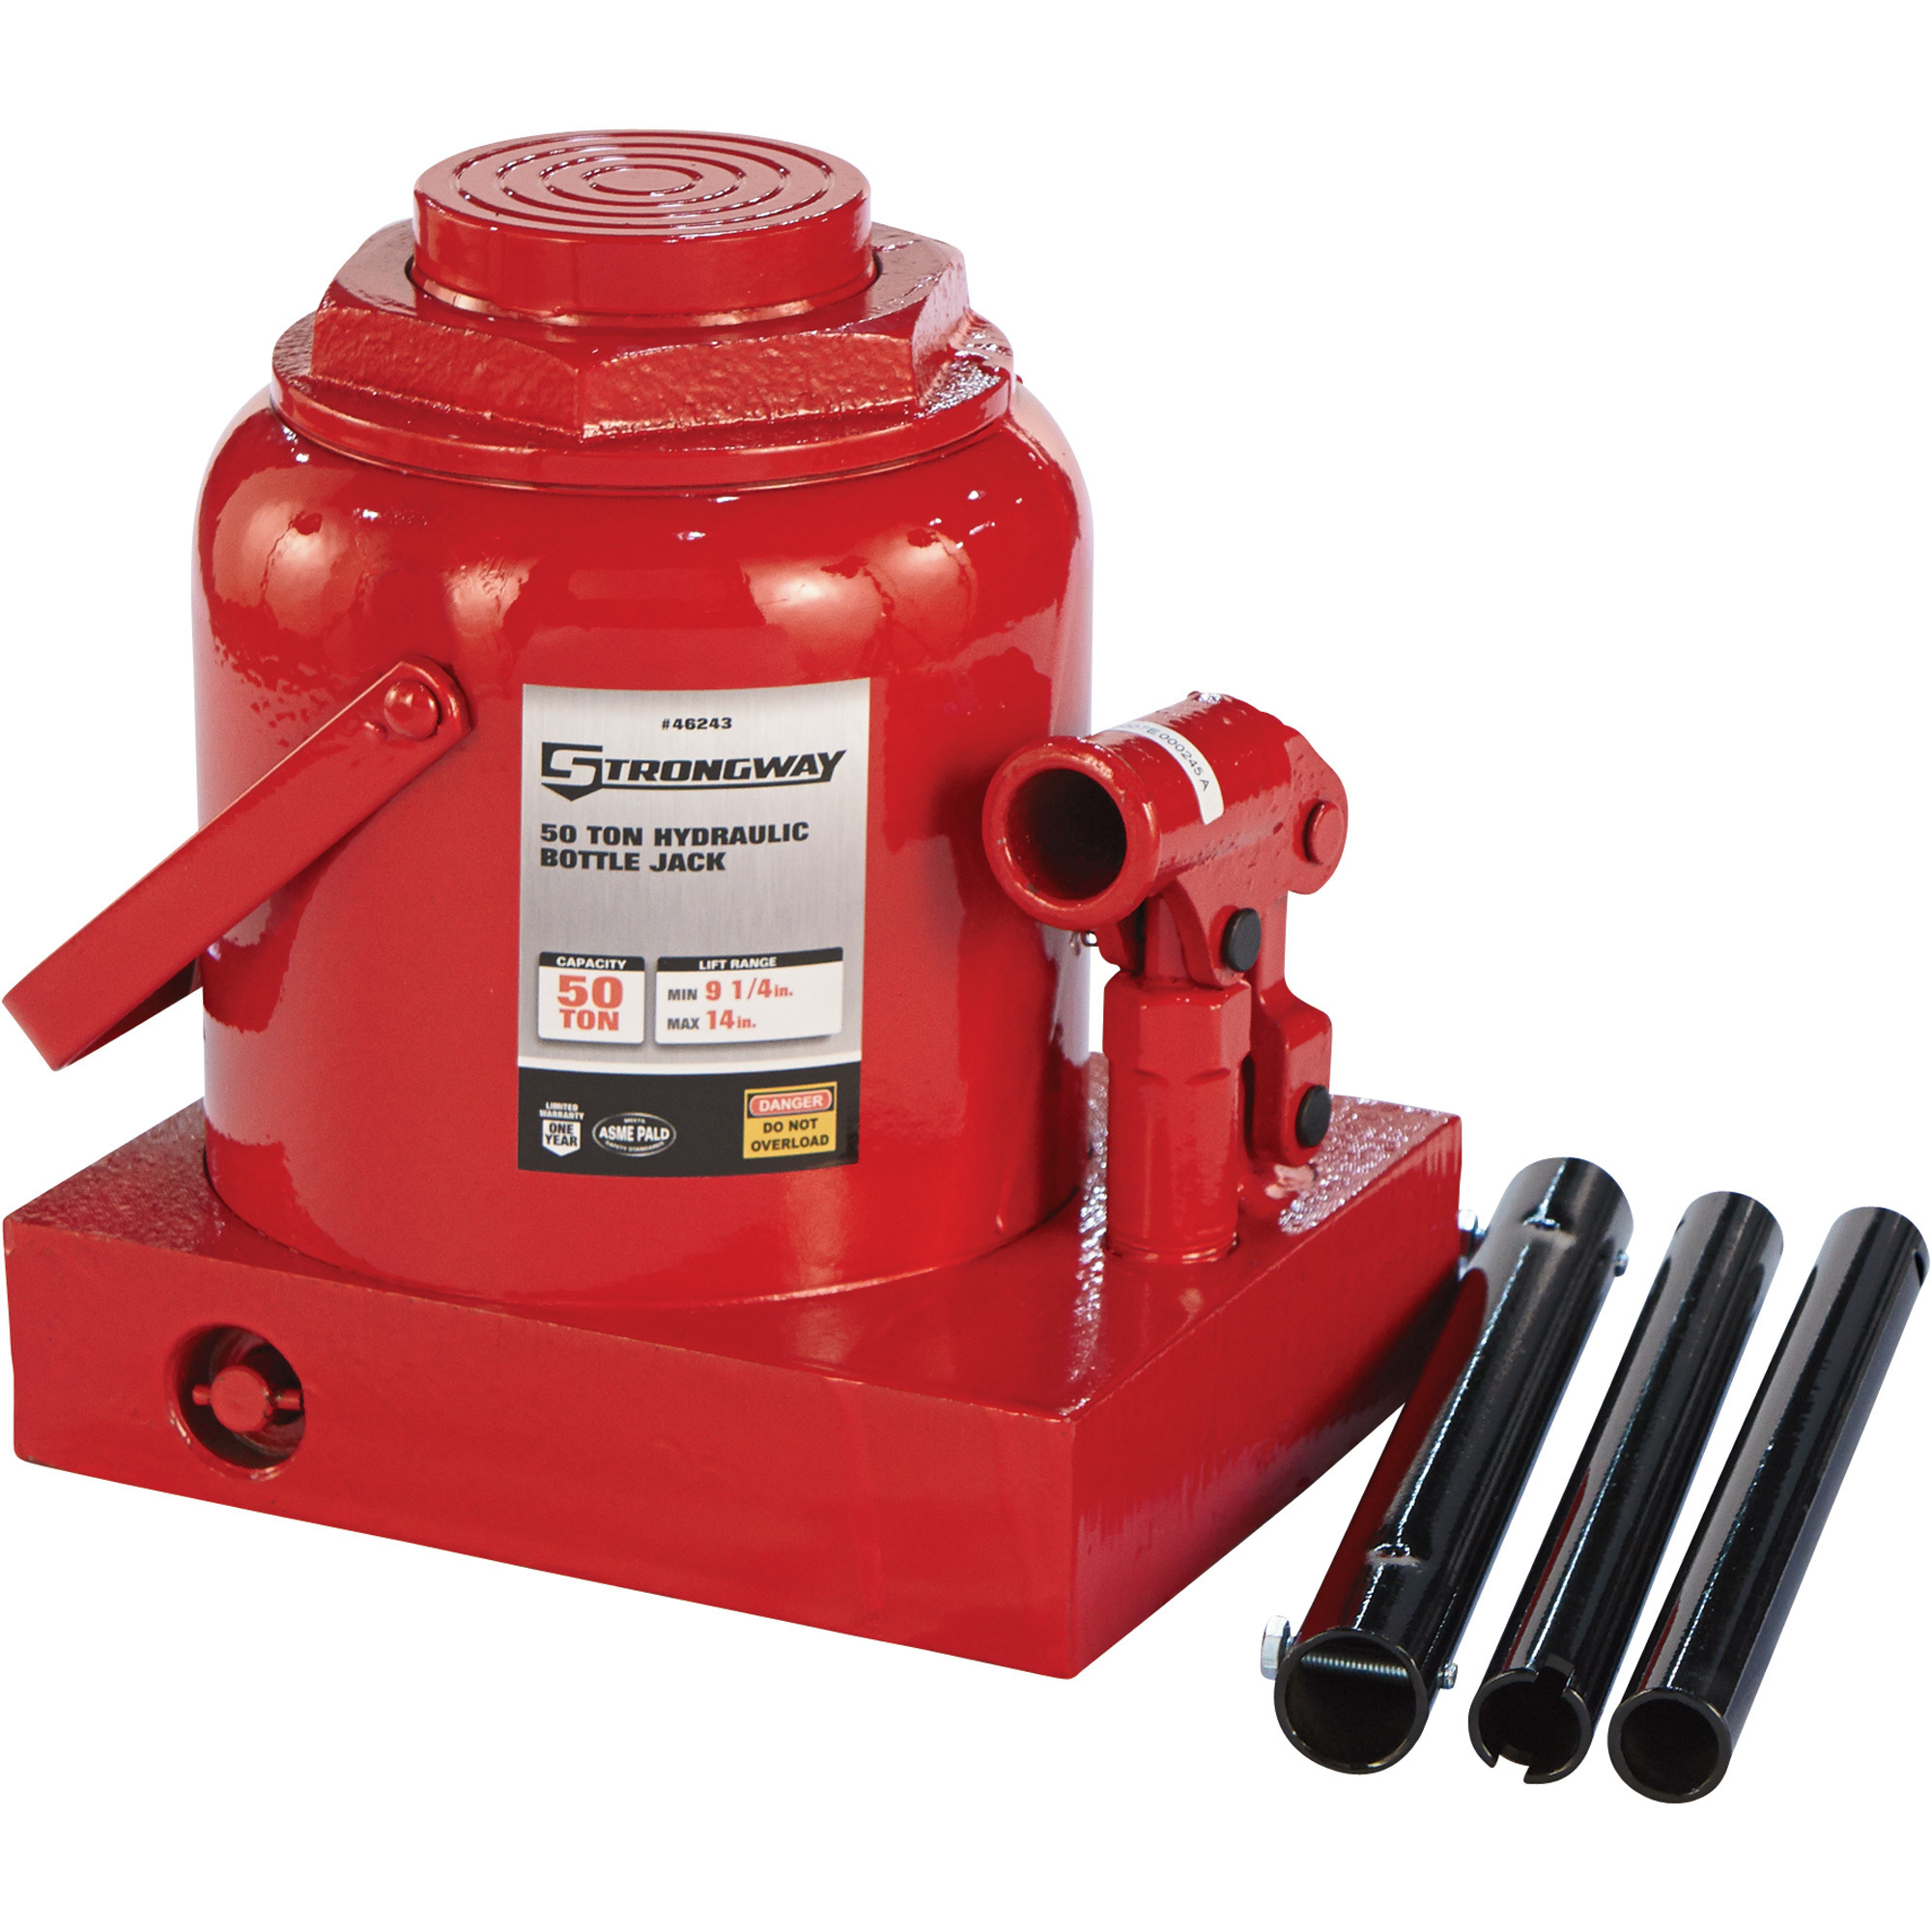 Strongway 50-Ton Hydraulic Bottle Jack Northern Tool